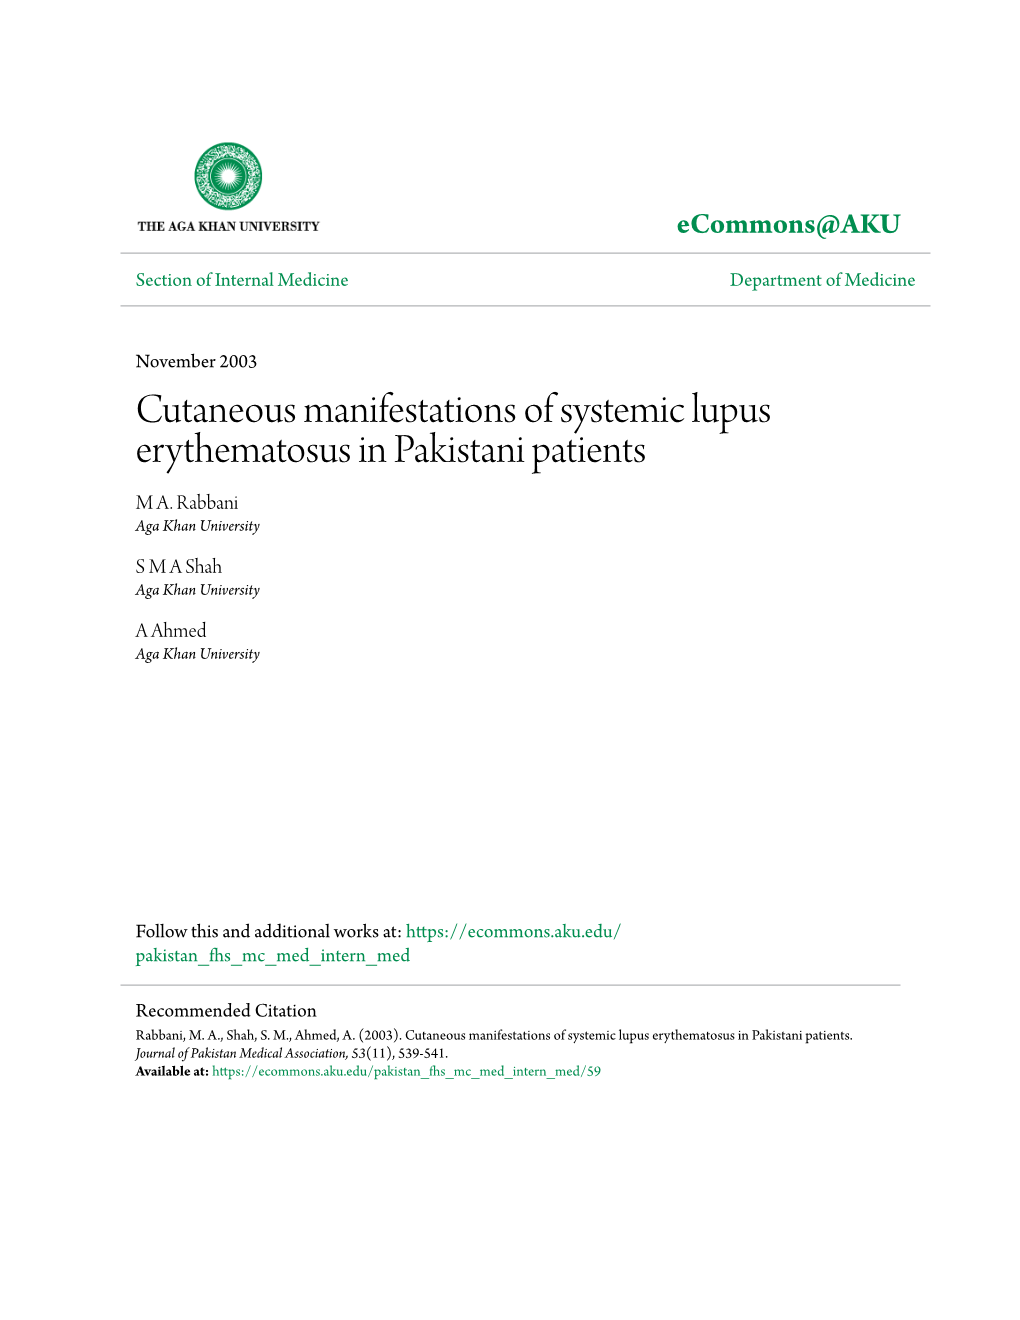 Cutaneous Manifestations of Systemic Lupus Erythematosus in Pakistani Patients M A